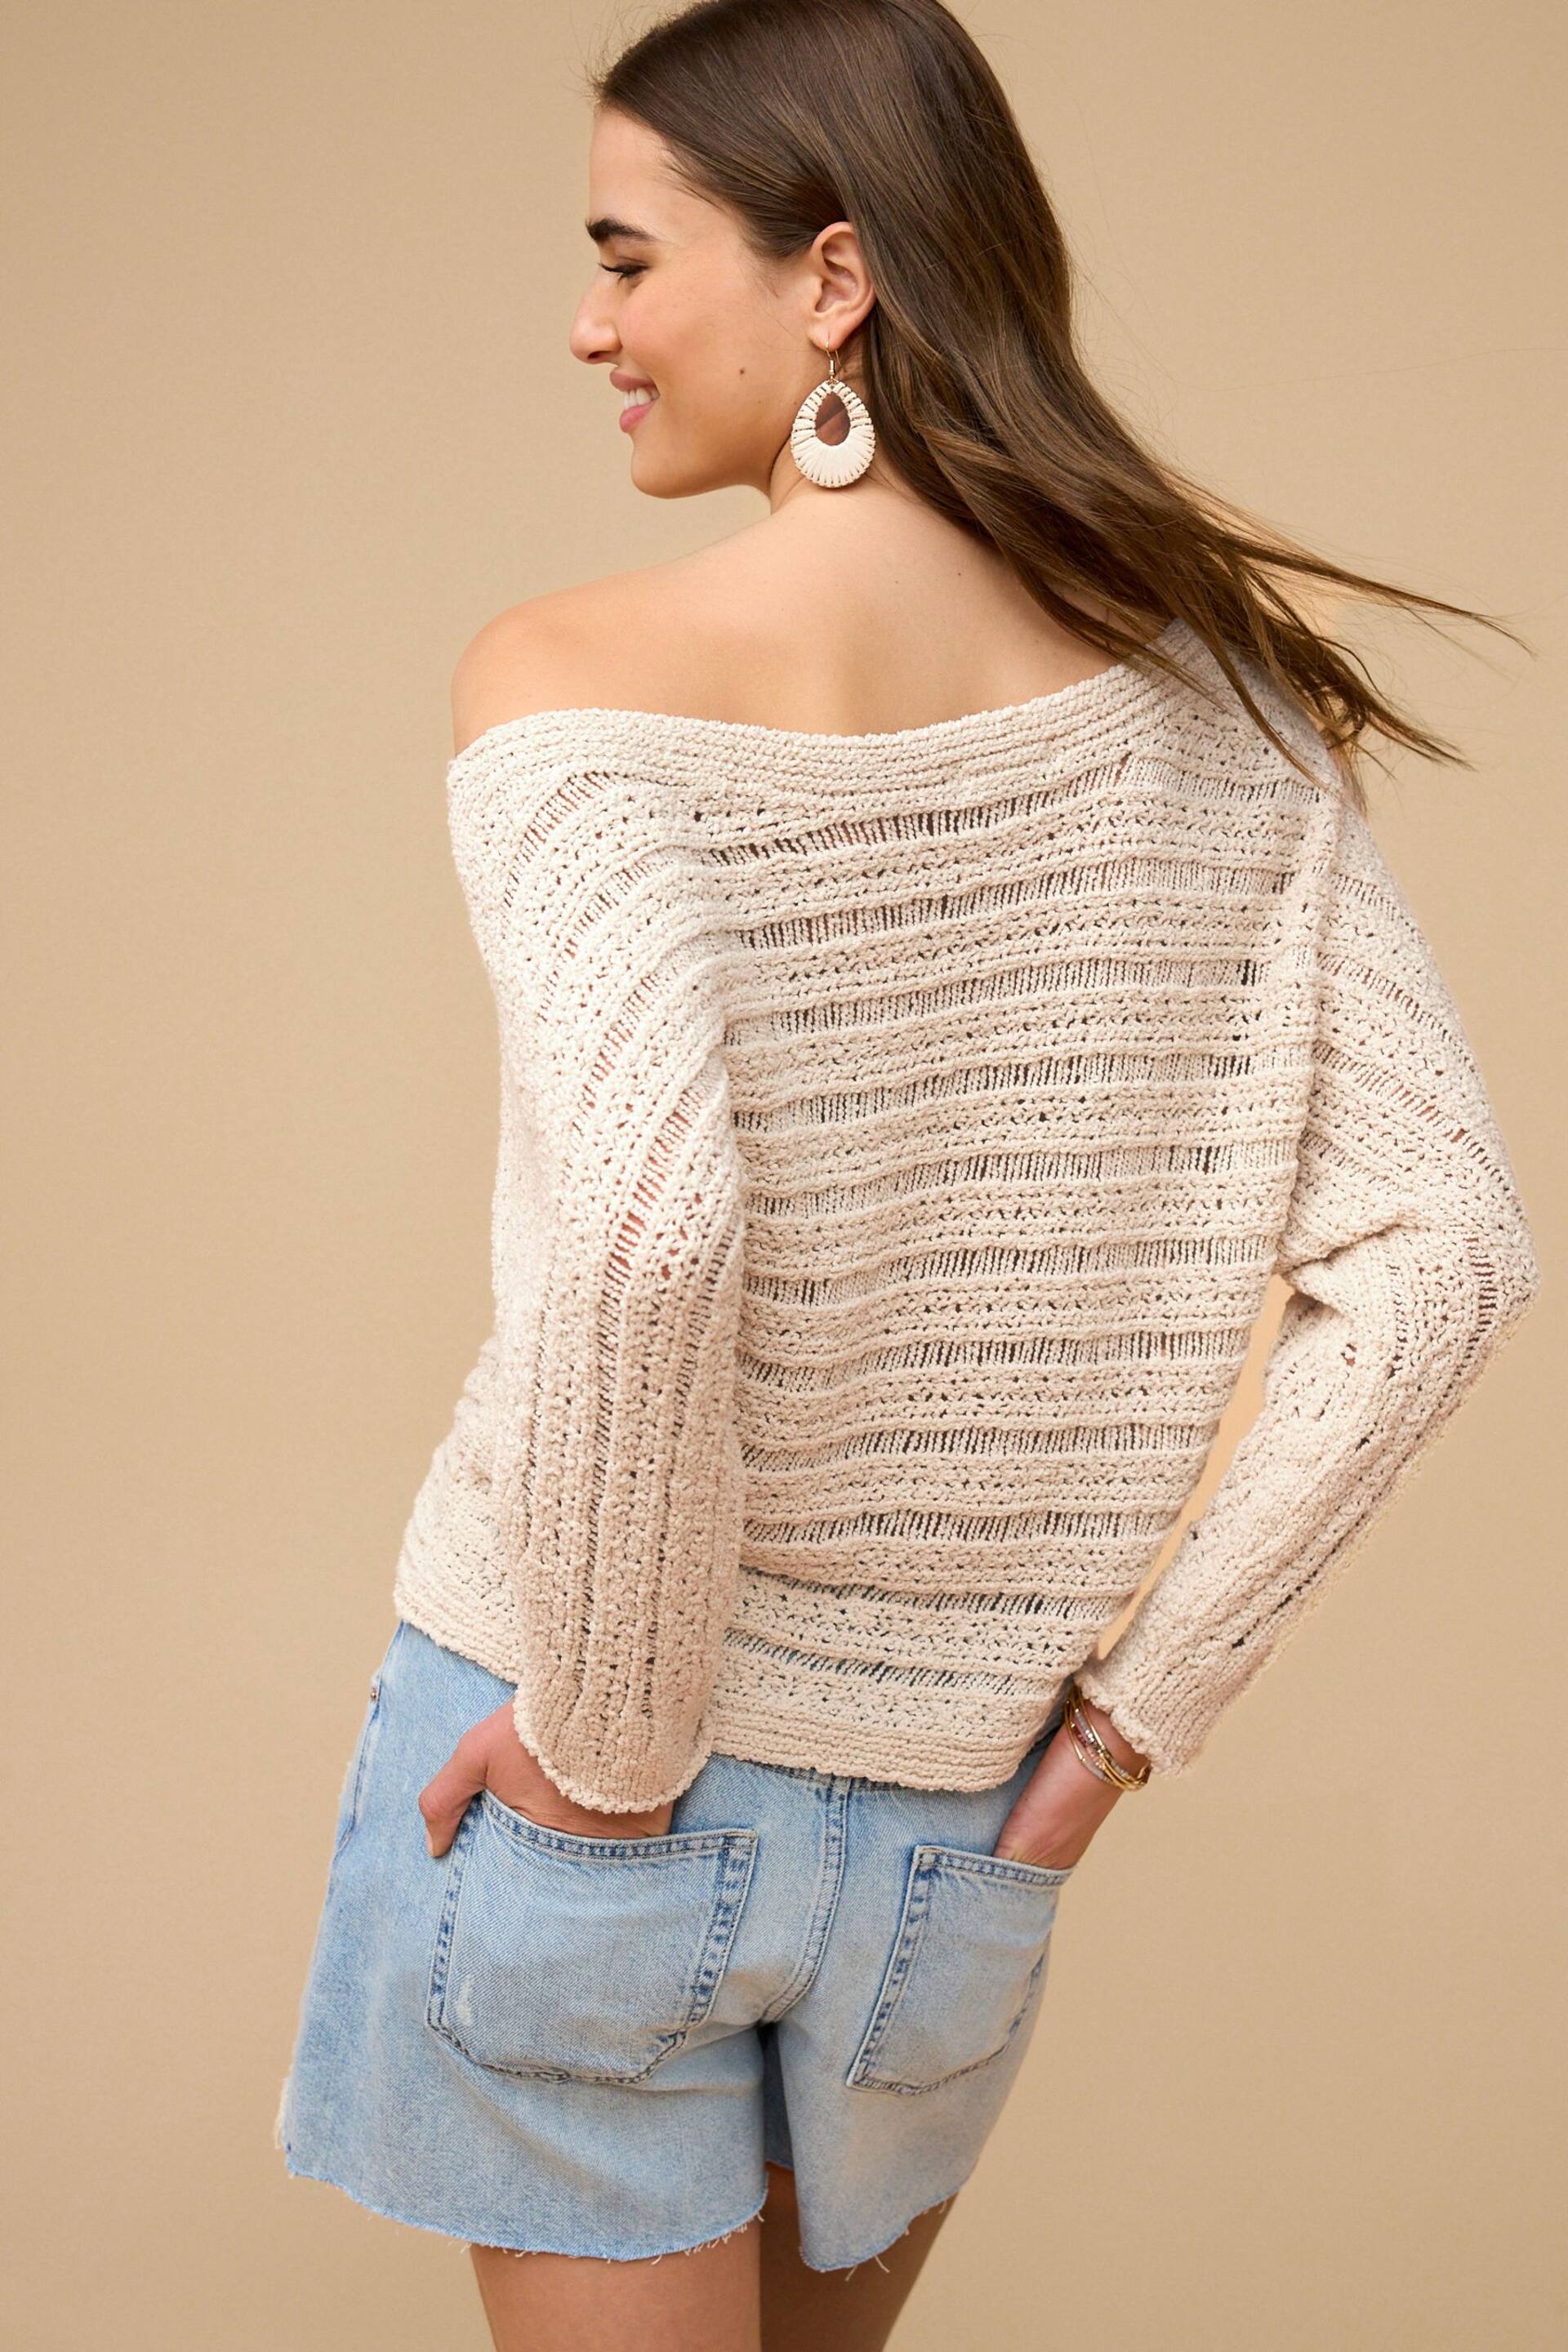 White Knitted Long Sleeve Off The Shoulder Top - Image 3 of 6